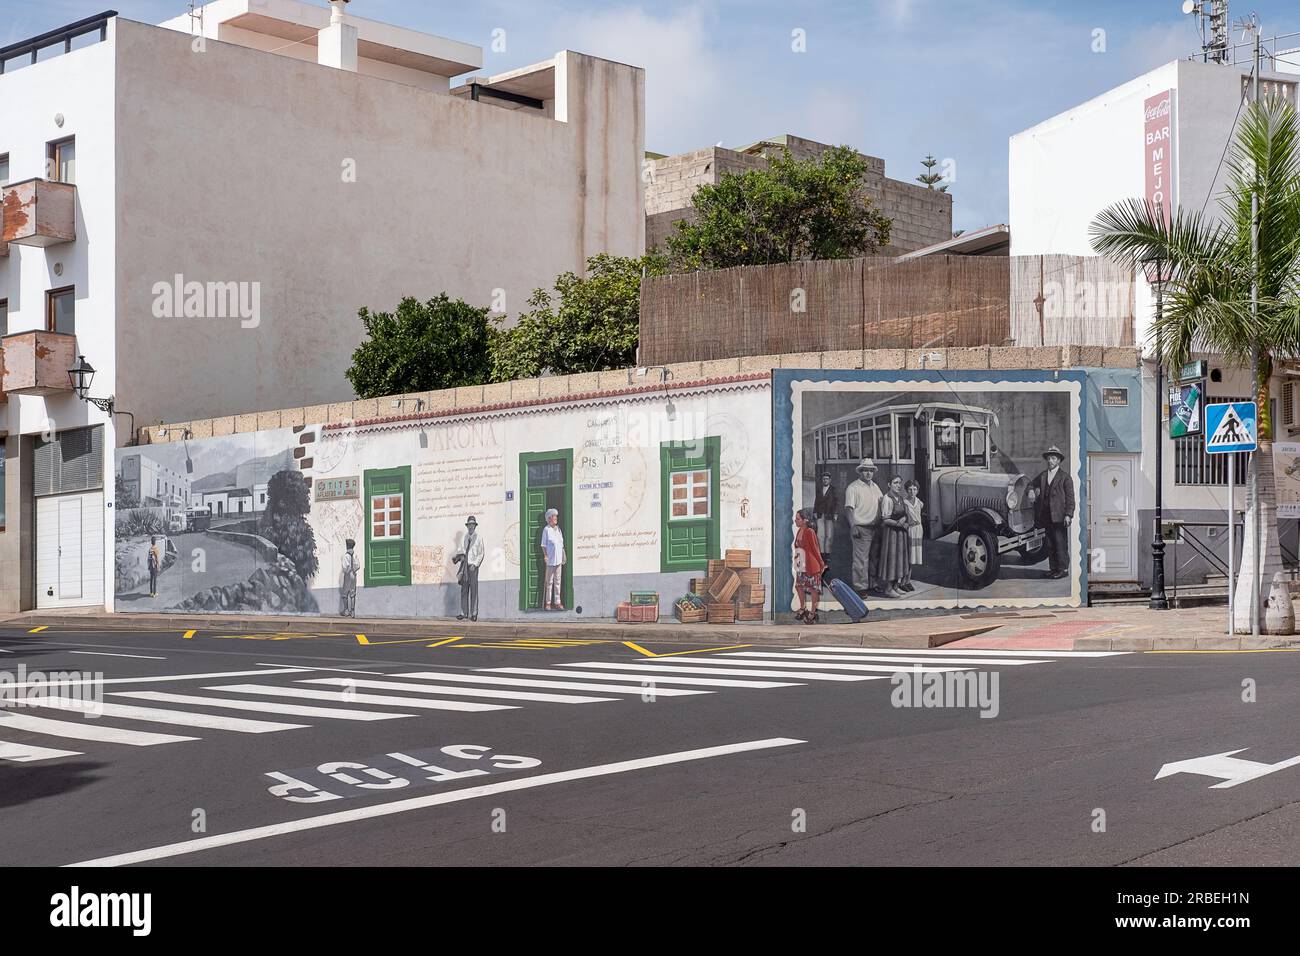 Street view of the beautiful mural decorating the walls of a building depicting traditions and people to celebrate local culture and history, Arona Stock Photo